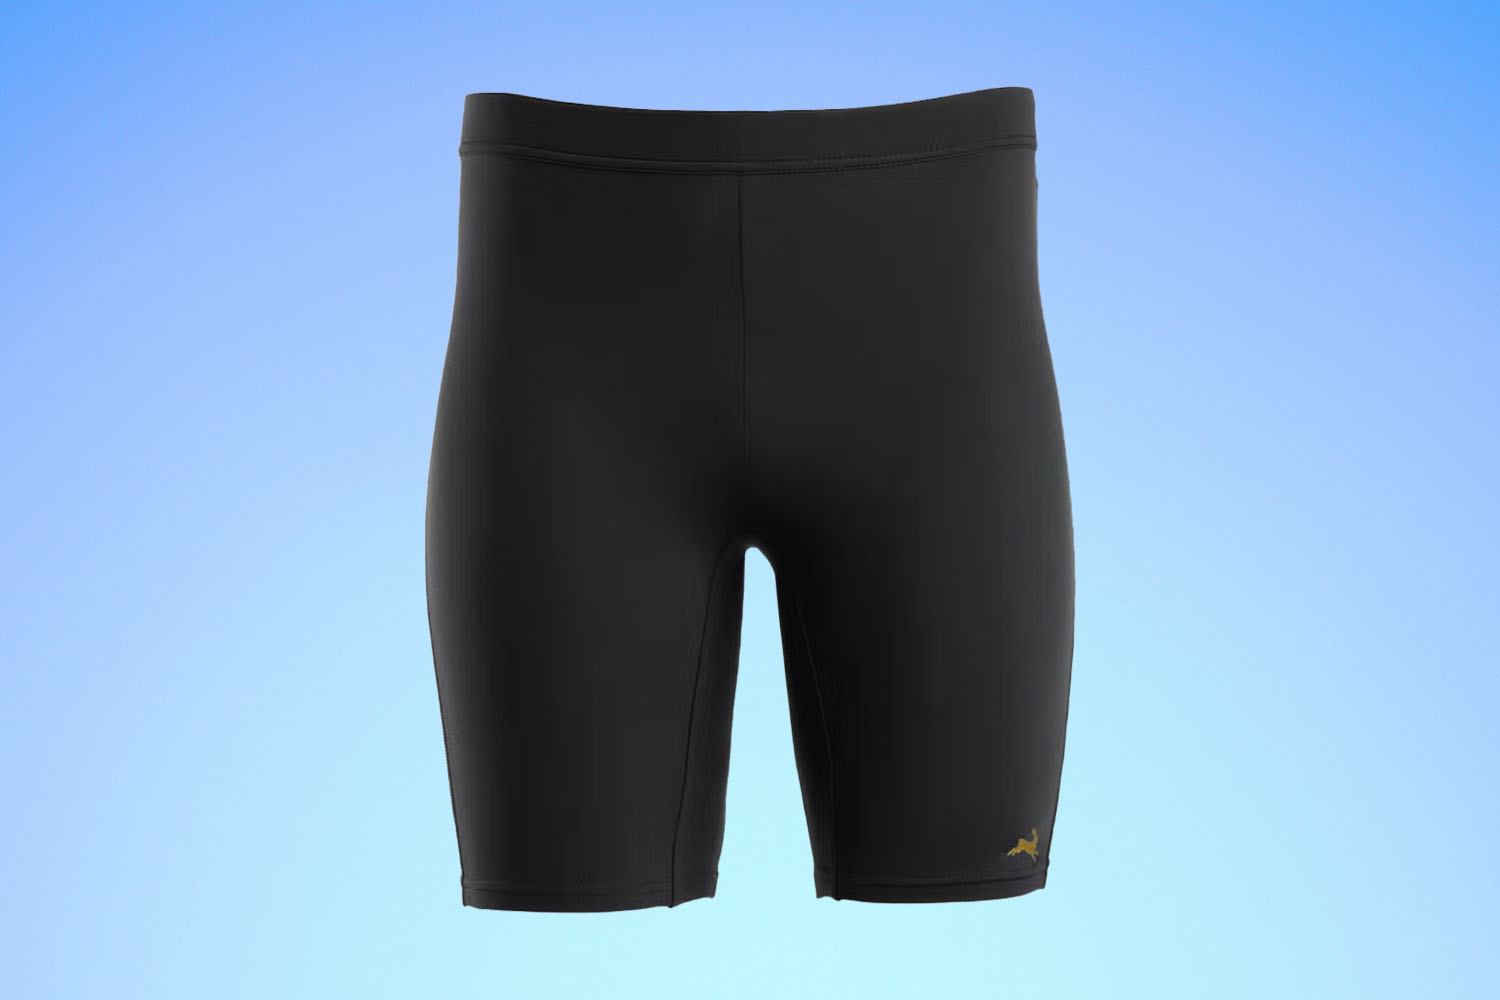 A pair of black running tights from Tracksmith on a blue gradient background